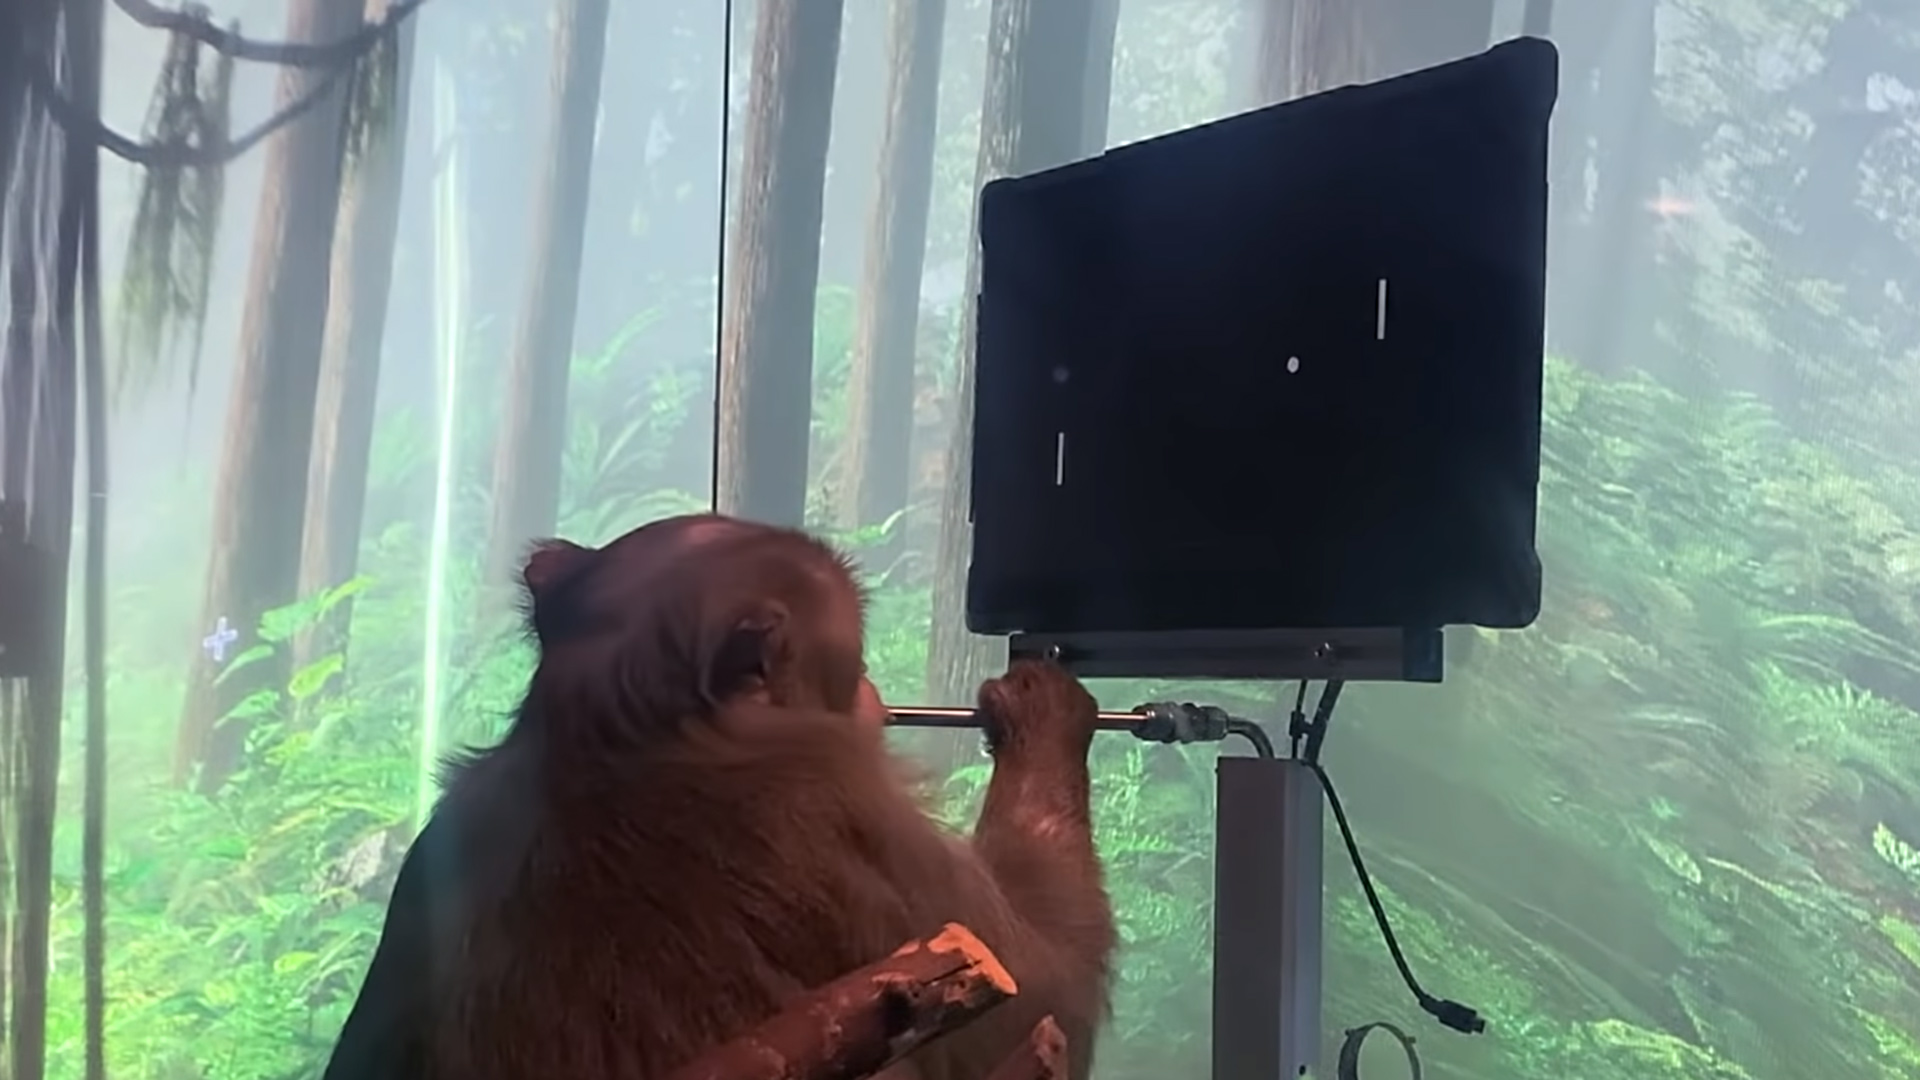 Neuralink has an amazing monkey who writes words with his brain